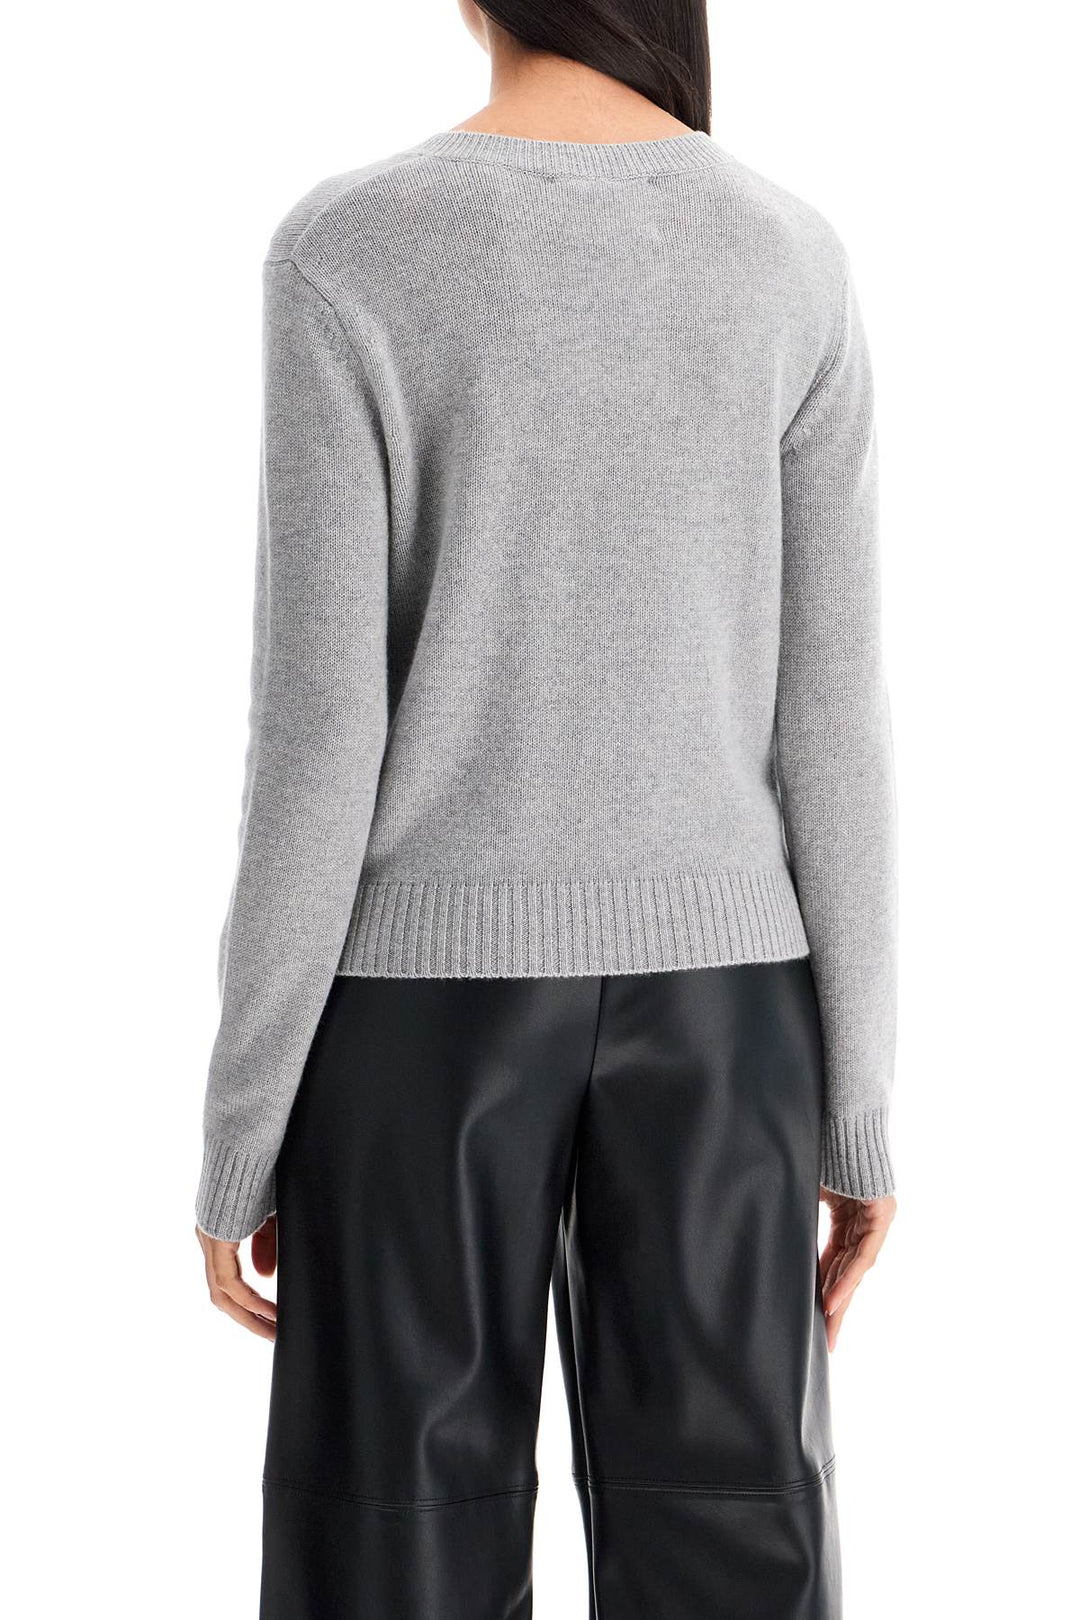 Lisa Yang Cashmere Mable Pullover   Grey